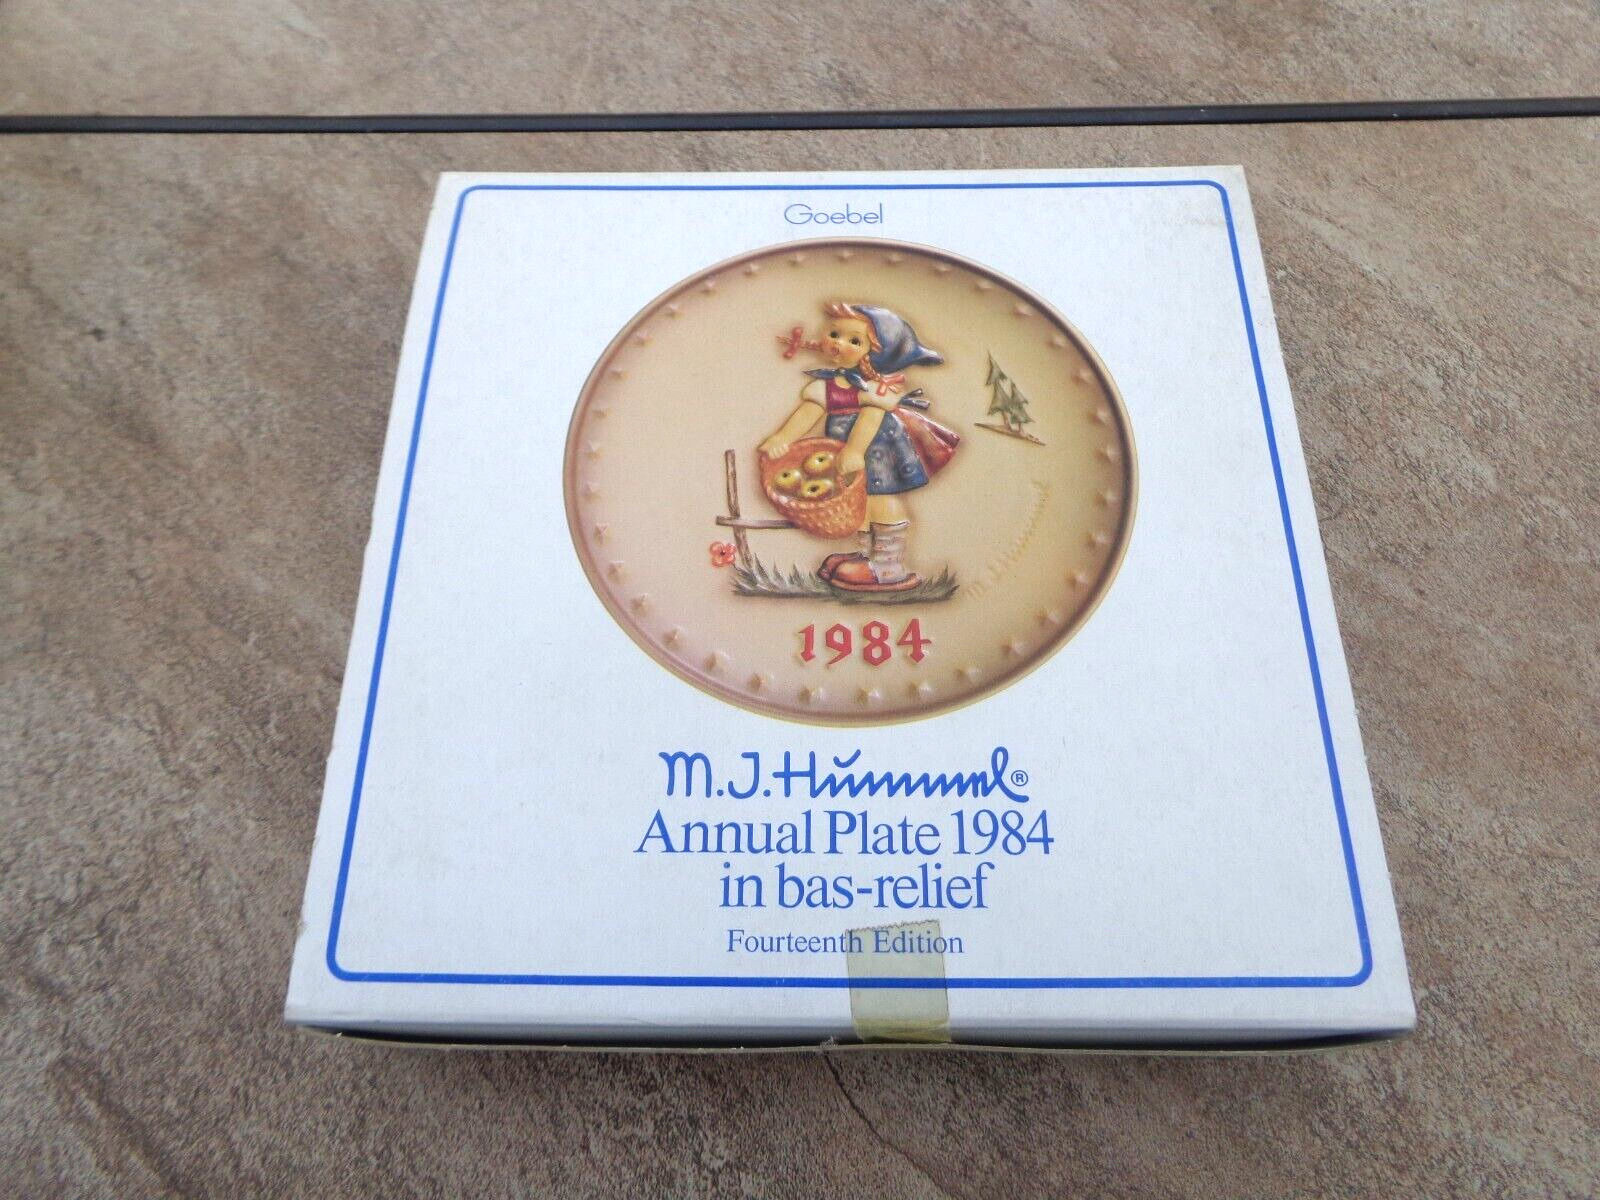 NEW Goebel M.I. Hummel 1984 Annual Plate In Bas Relief 14th Edition Box & Papers